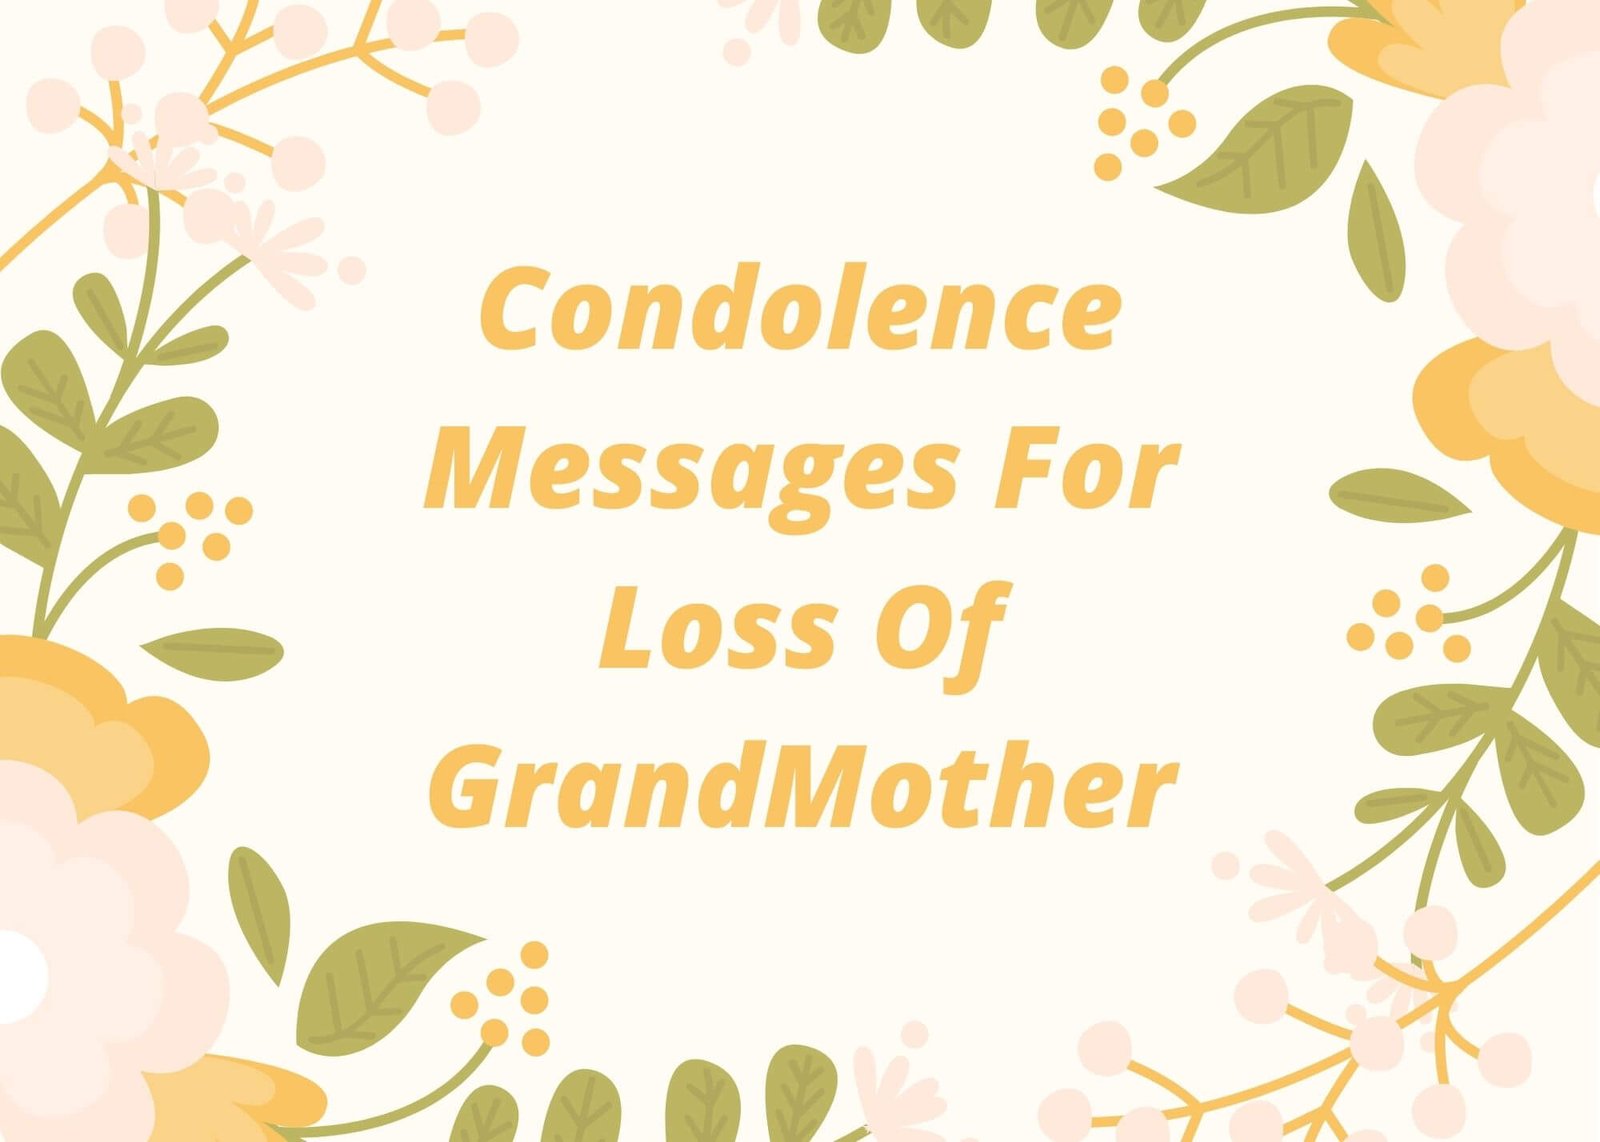 condolence messages for loss of grandmother